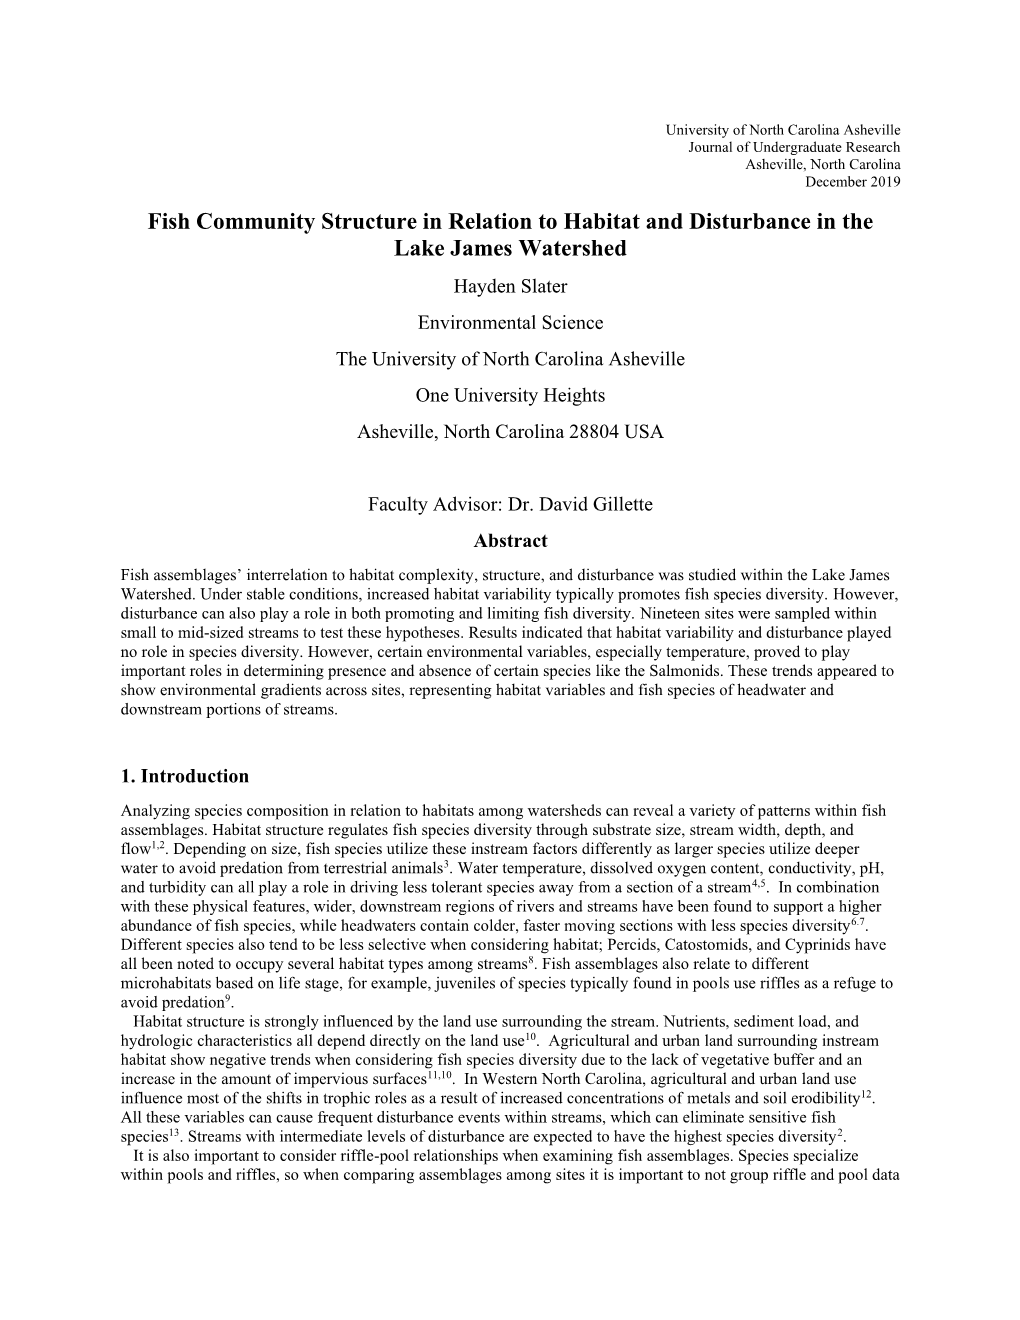 Slater, Hayden, Fish Community Structure in Relation to Habitat And